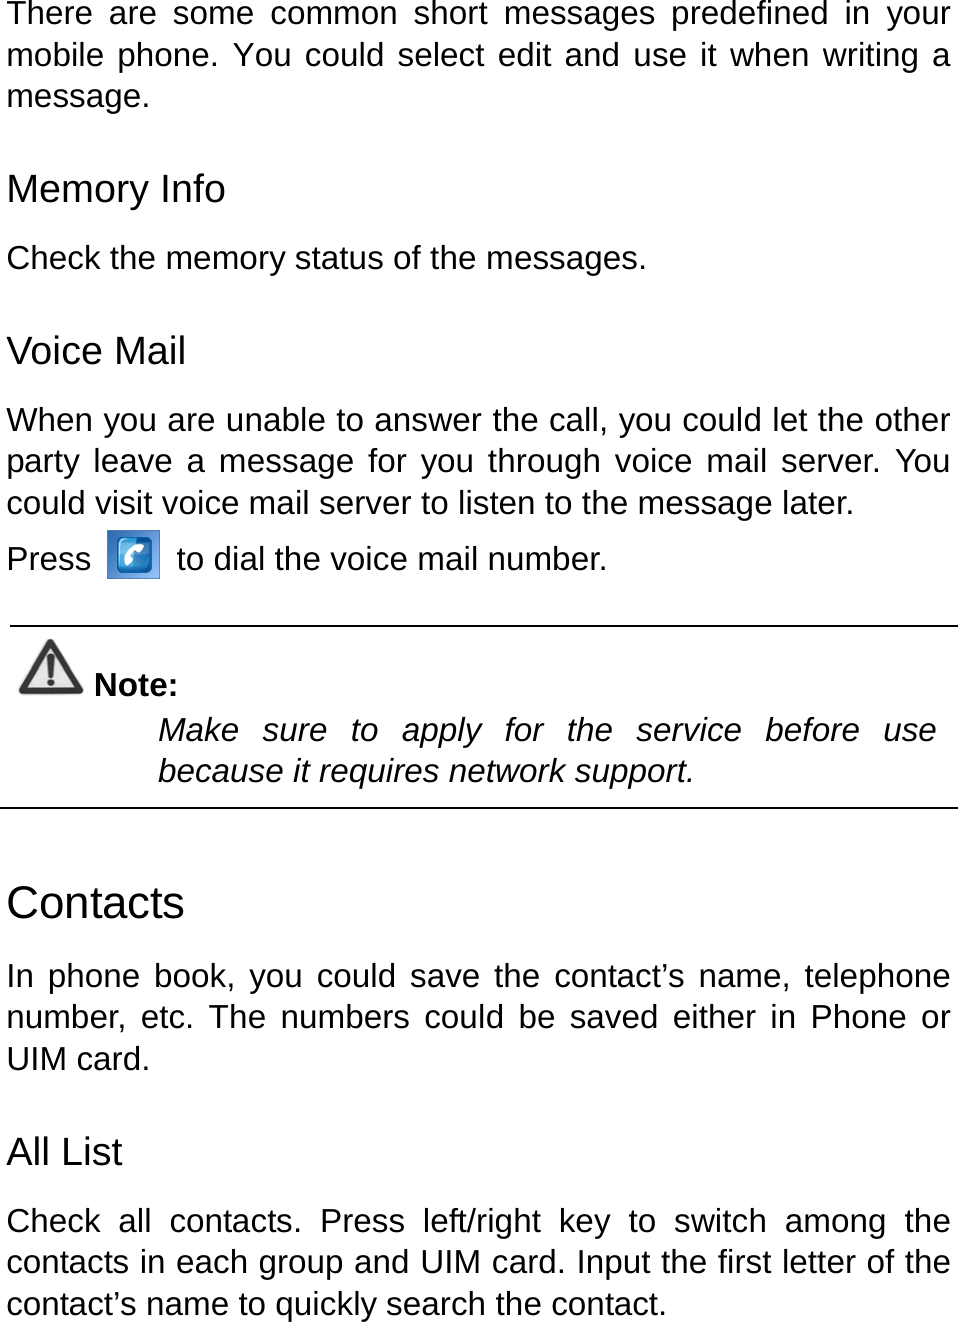   There are some common short messages predefined in your mobile phone. You could select edit and use it when writing a message. Memory Info Check the memory status of the messages.   Voice Mail When you are unable to answer the call, you could let the other party leave a message for you through voice mail server. You could visit voice mail server to listen to the message later.   Press   to dial the voice mail number.  Note: Make sure to apply for the service before use because it requires network support.    Contacts In phone book, you could save the contact’s name, telephone number, etc. The numbers could be saved either in Phone or UIM card.   All List Check all contacts. Press left/right key to switch among the contacts in each group and UIM card. Input the first letter of the contact’s name to quickly search the contact.   